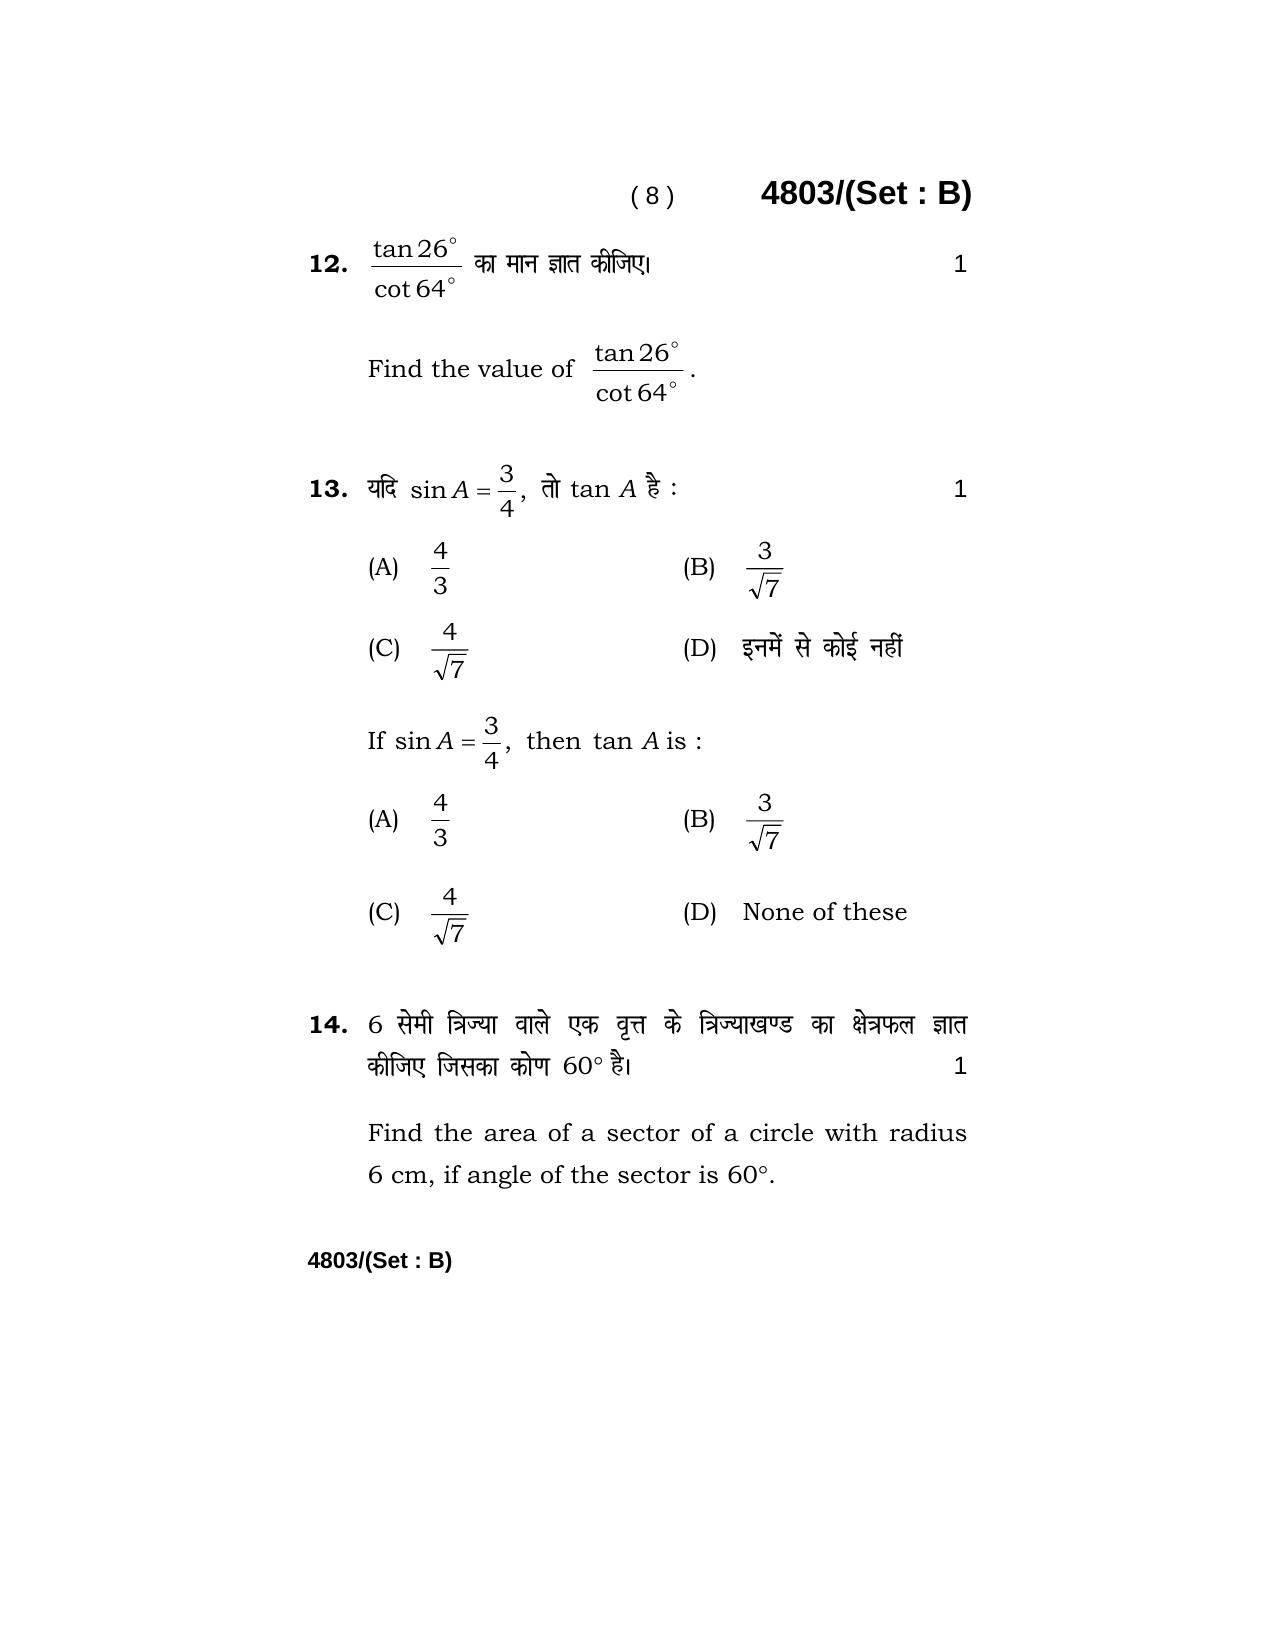 Haryana Board HBSE Class 10 Mathematics 2020 Question Paper - Page 24